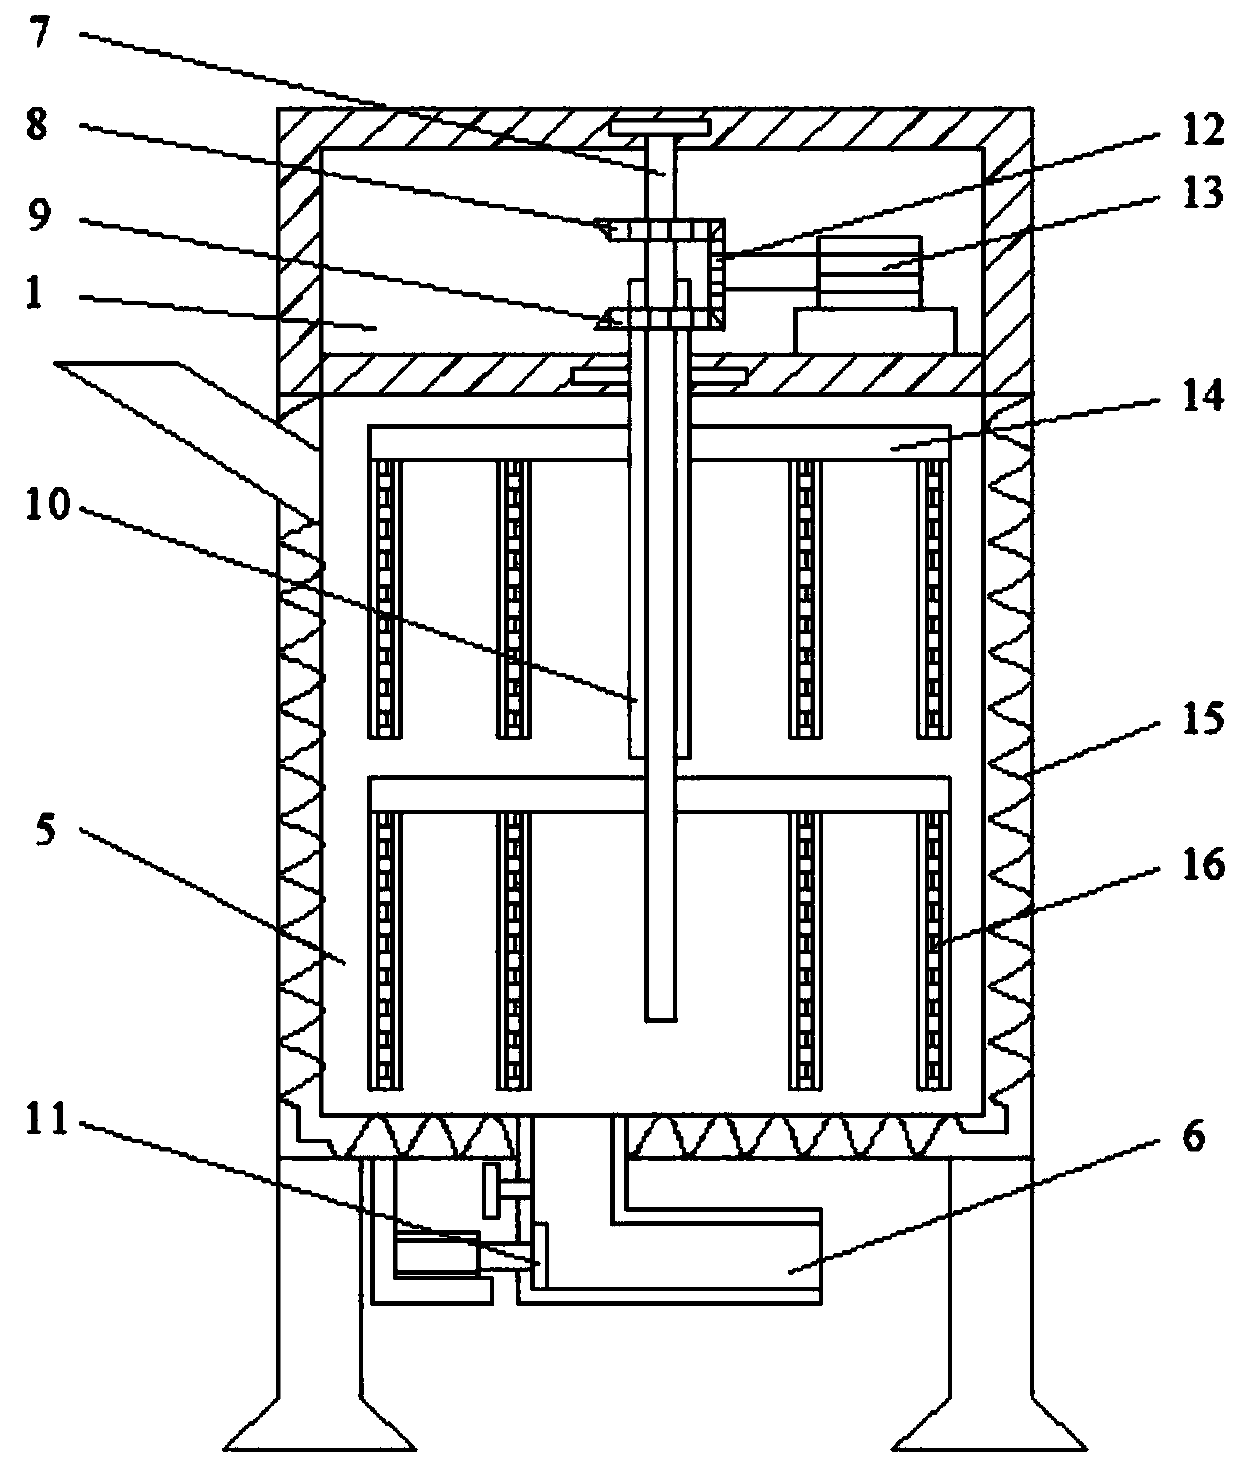 Heating and uniform mixing device for production of circulation promotion and hair growth shampoo